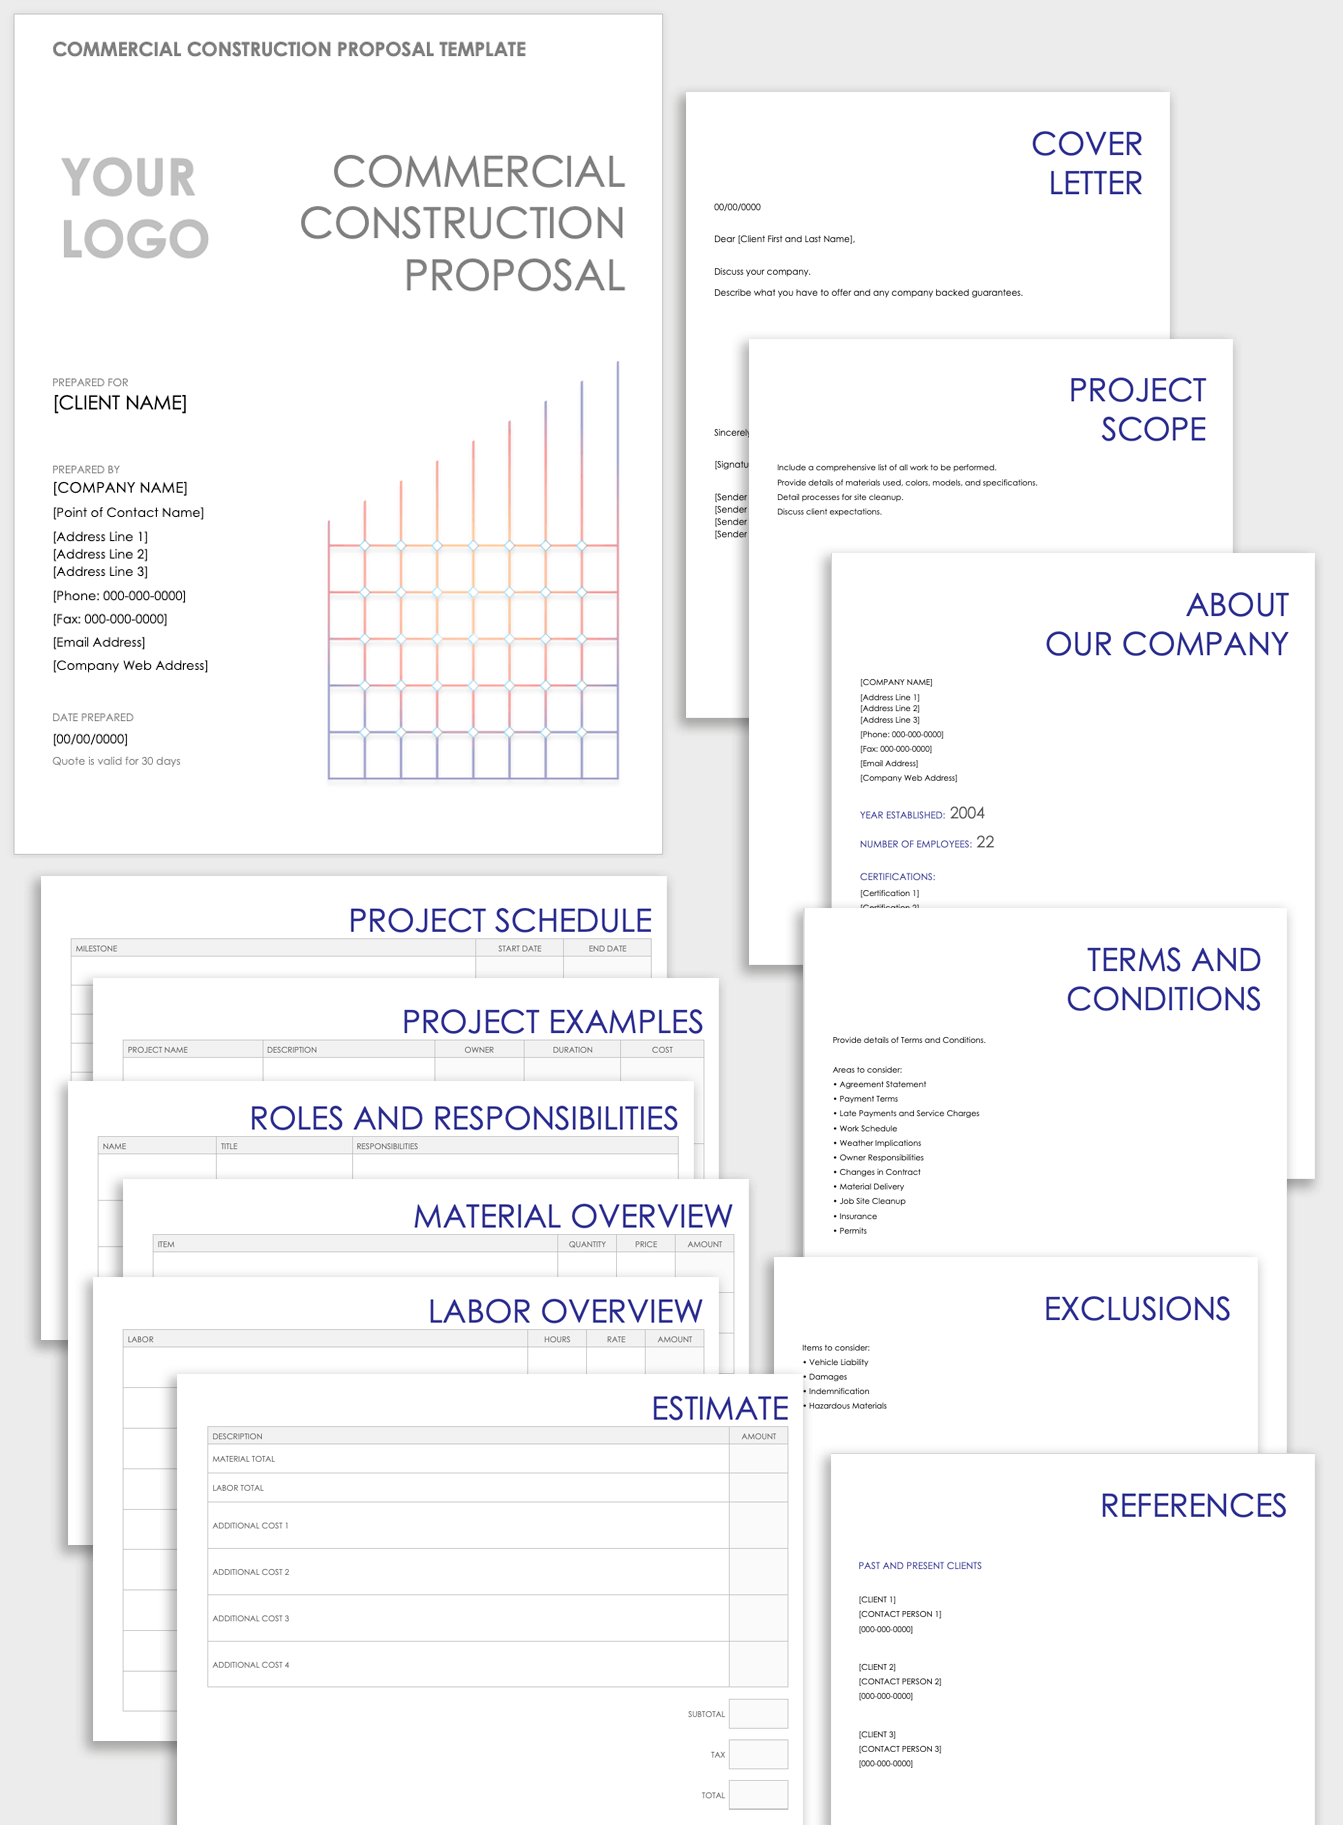 Commercial Construction Proposal Template